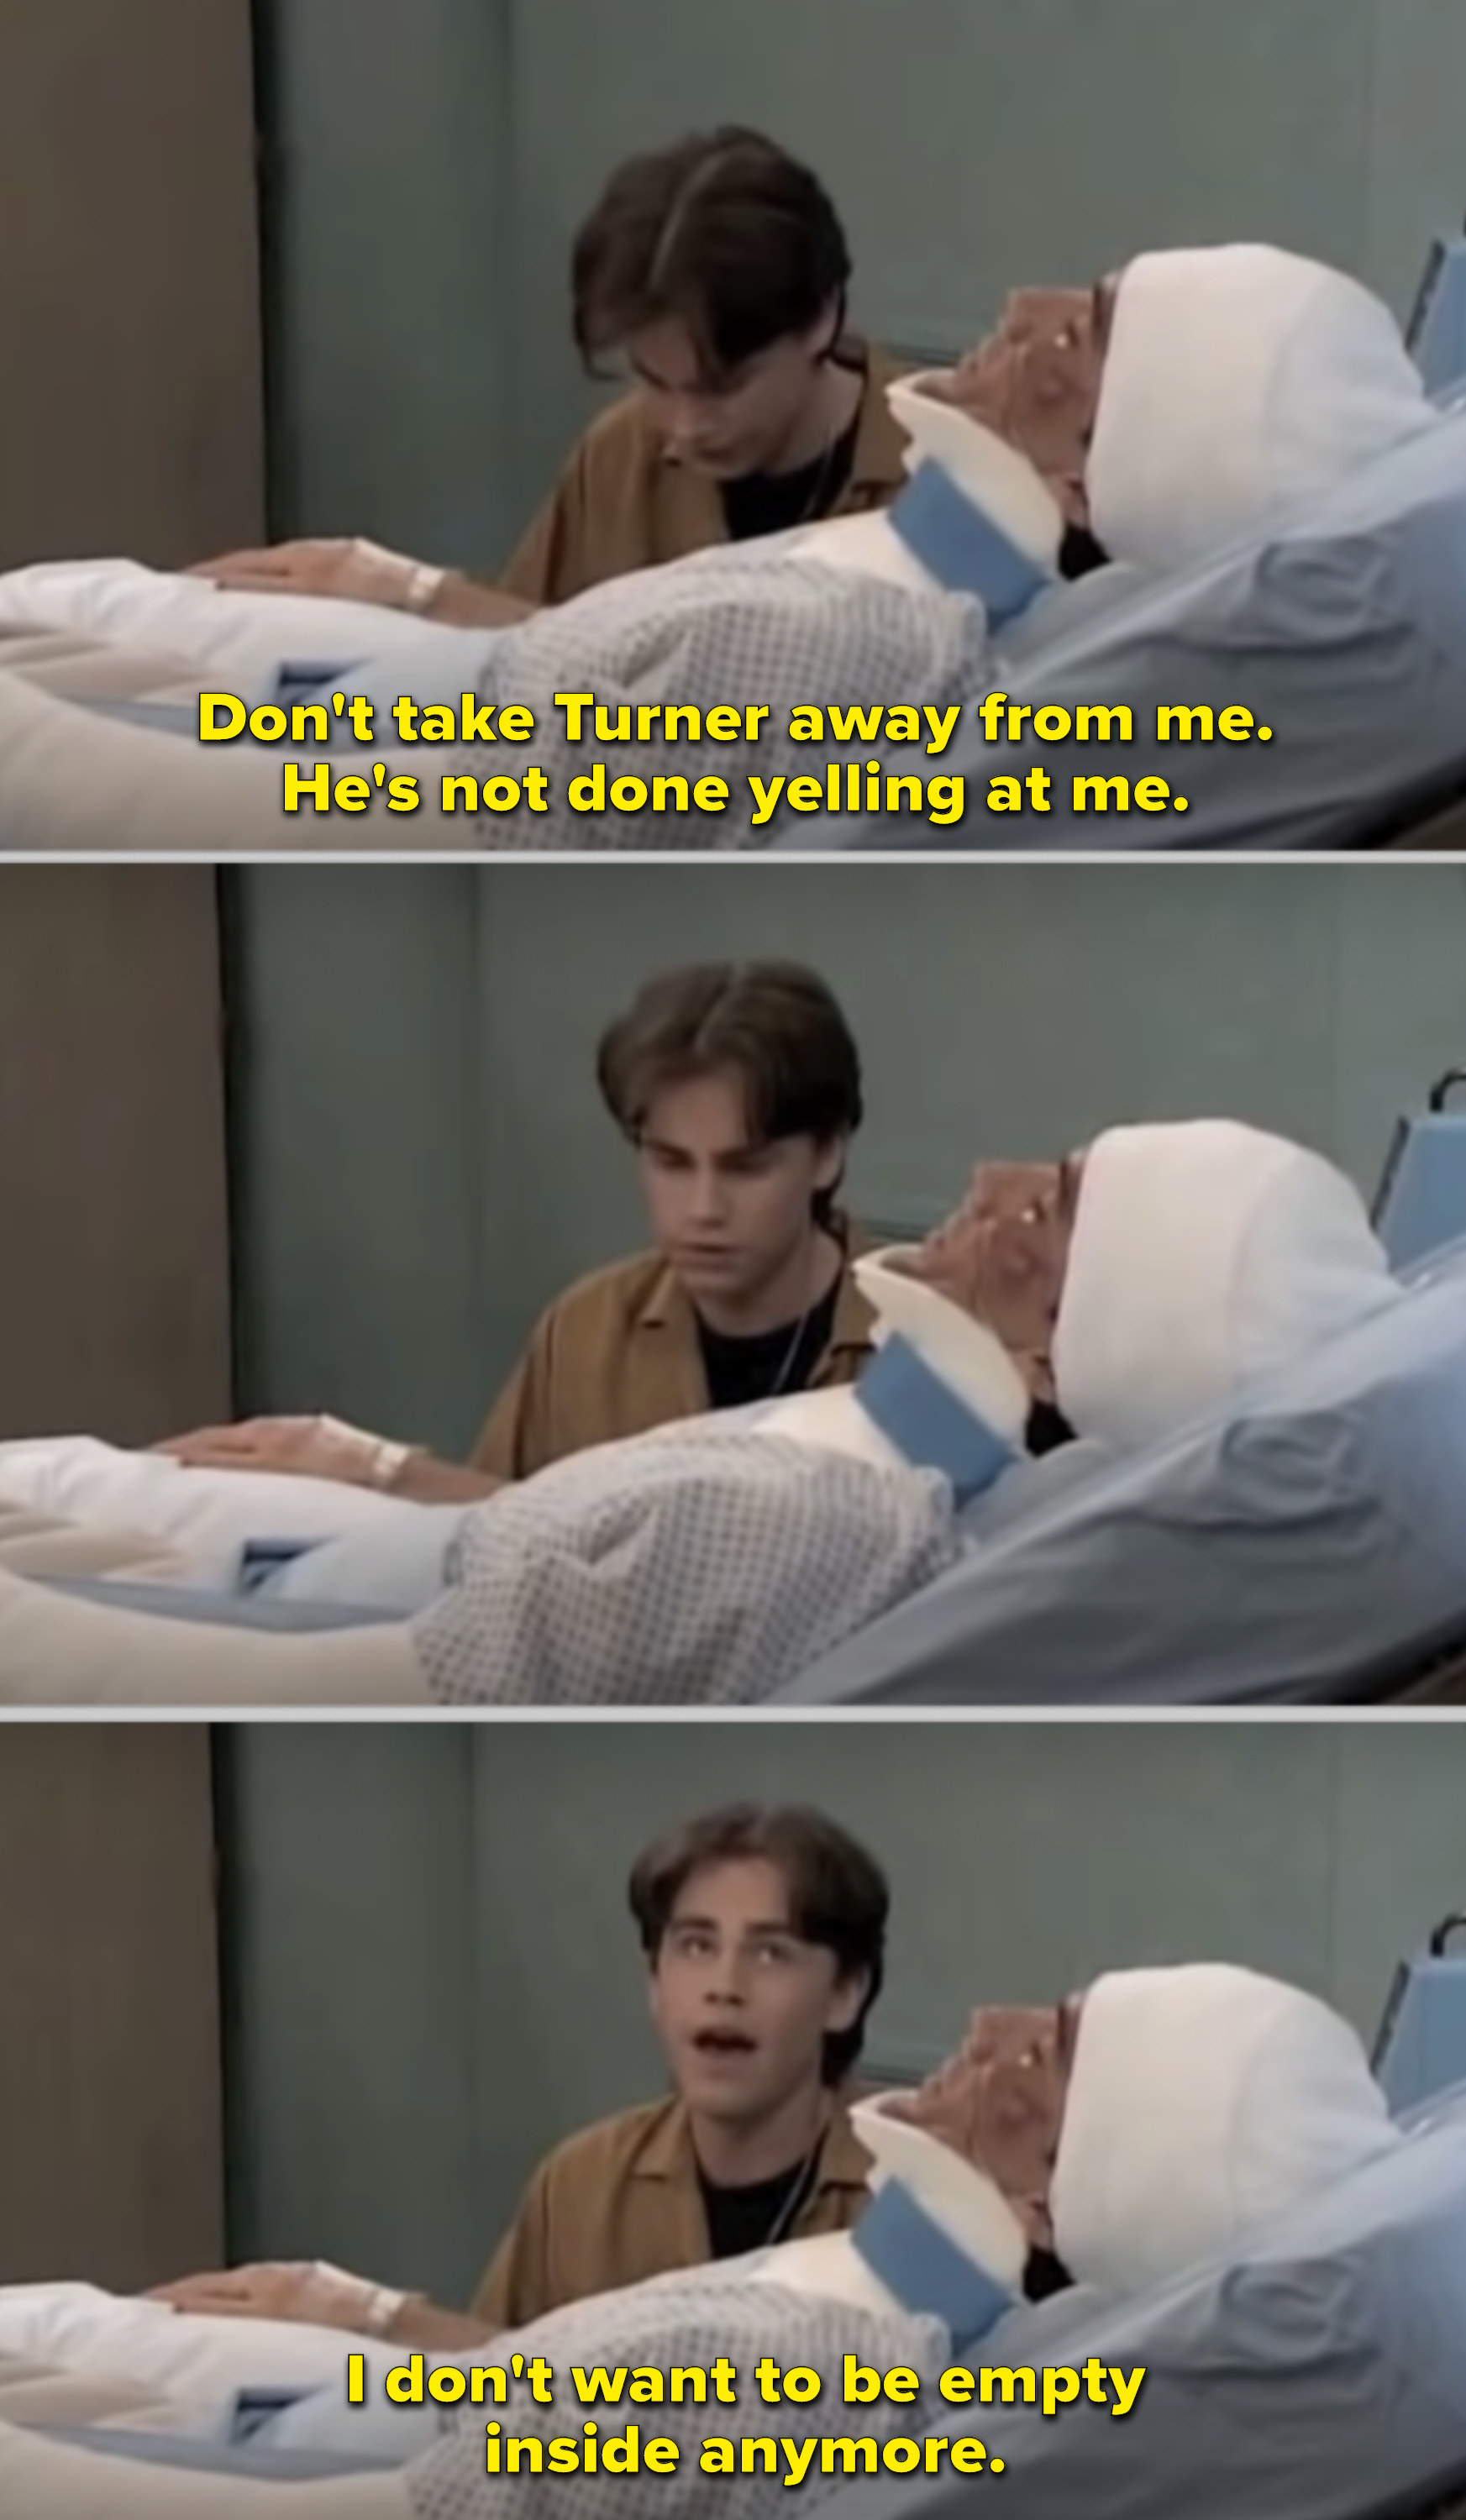 Mr. Turner lying in his hospital bed